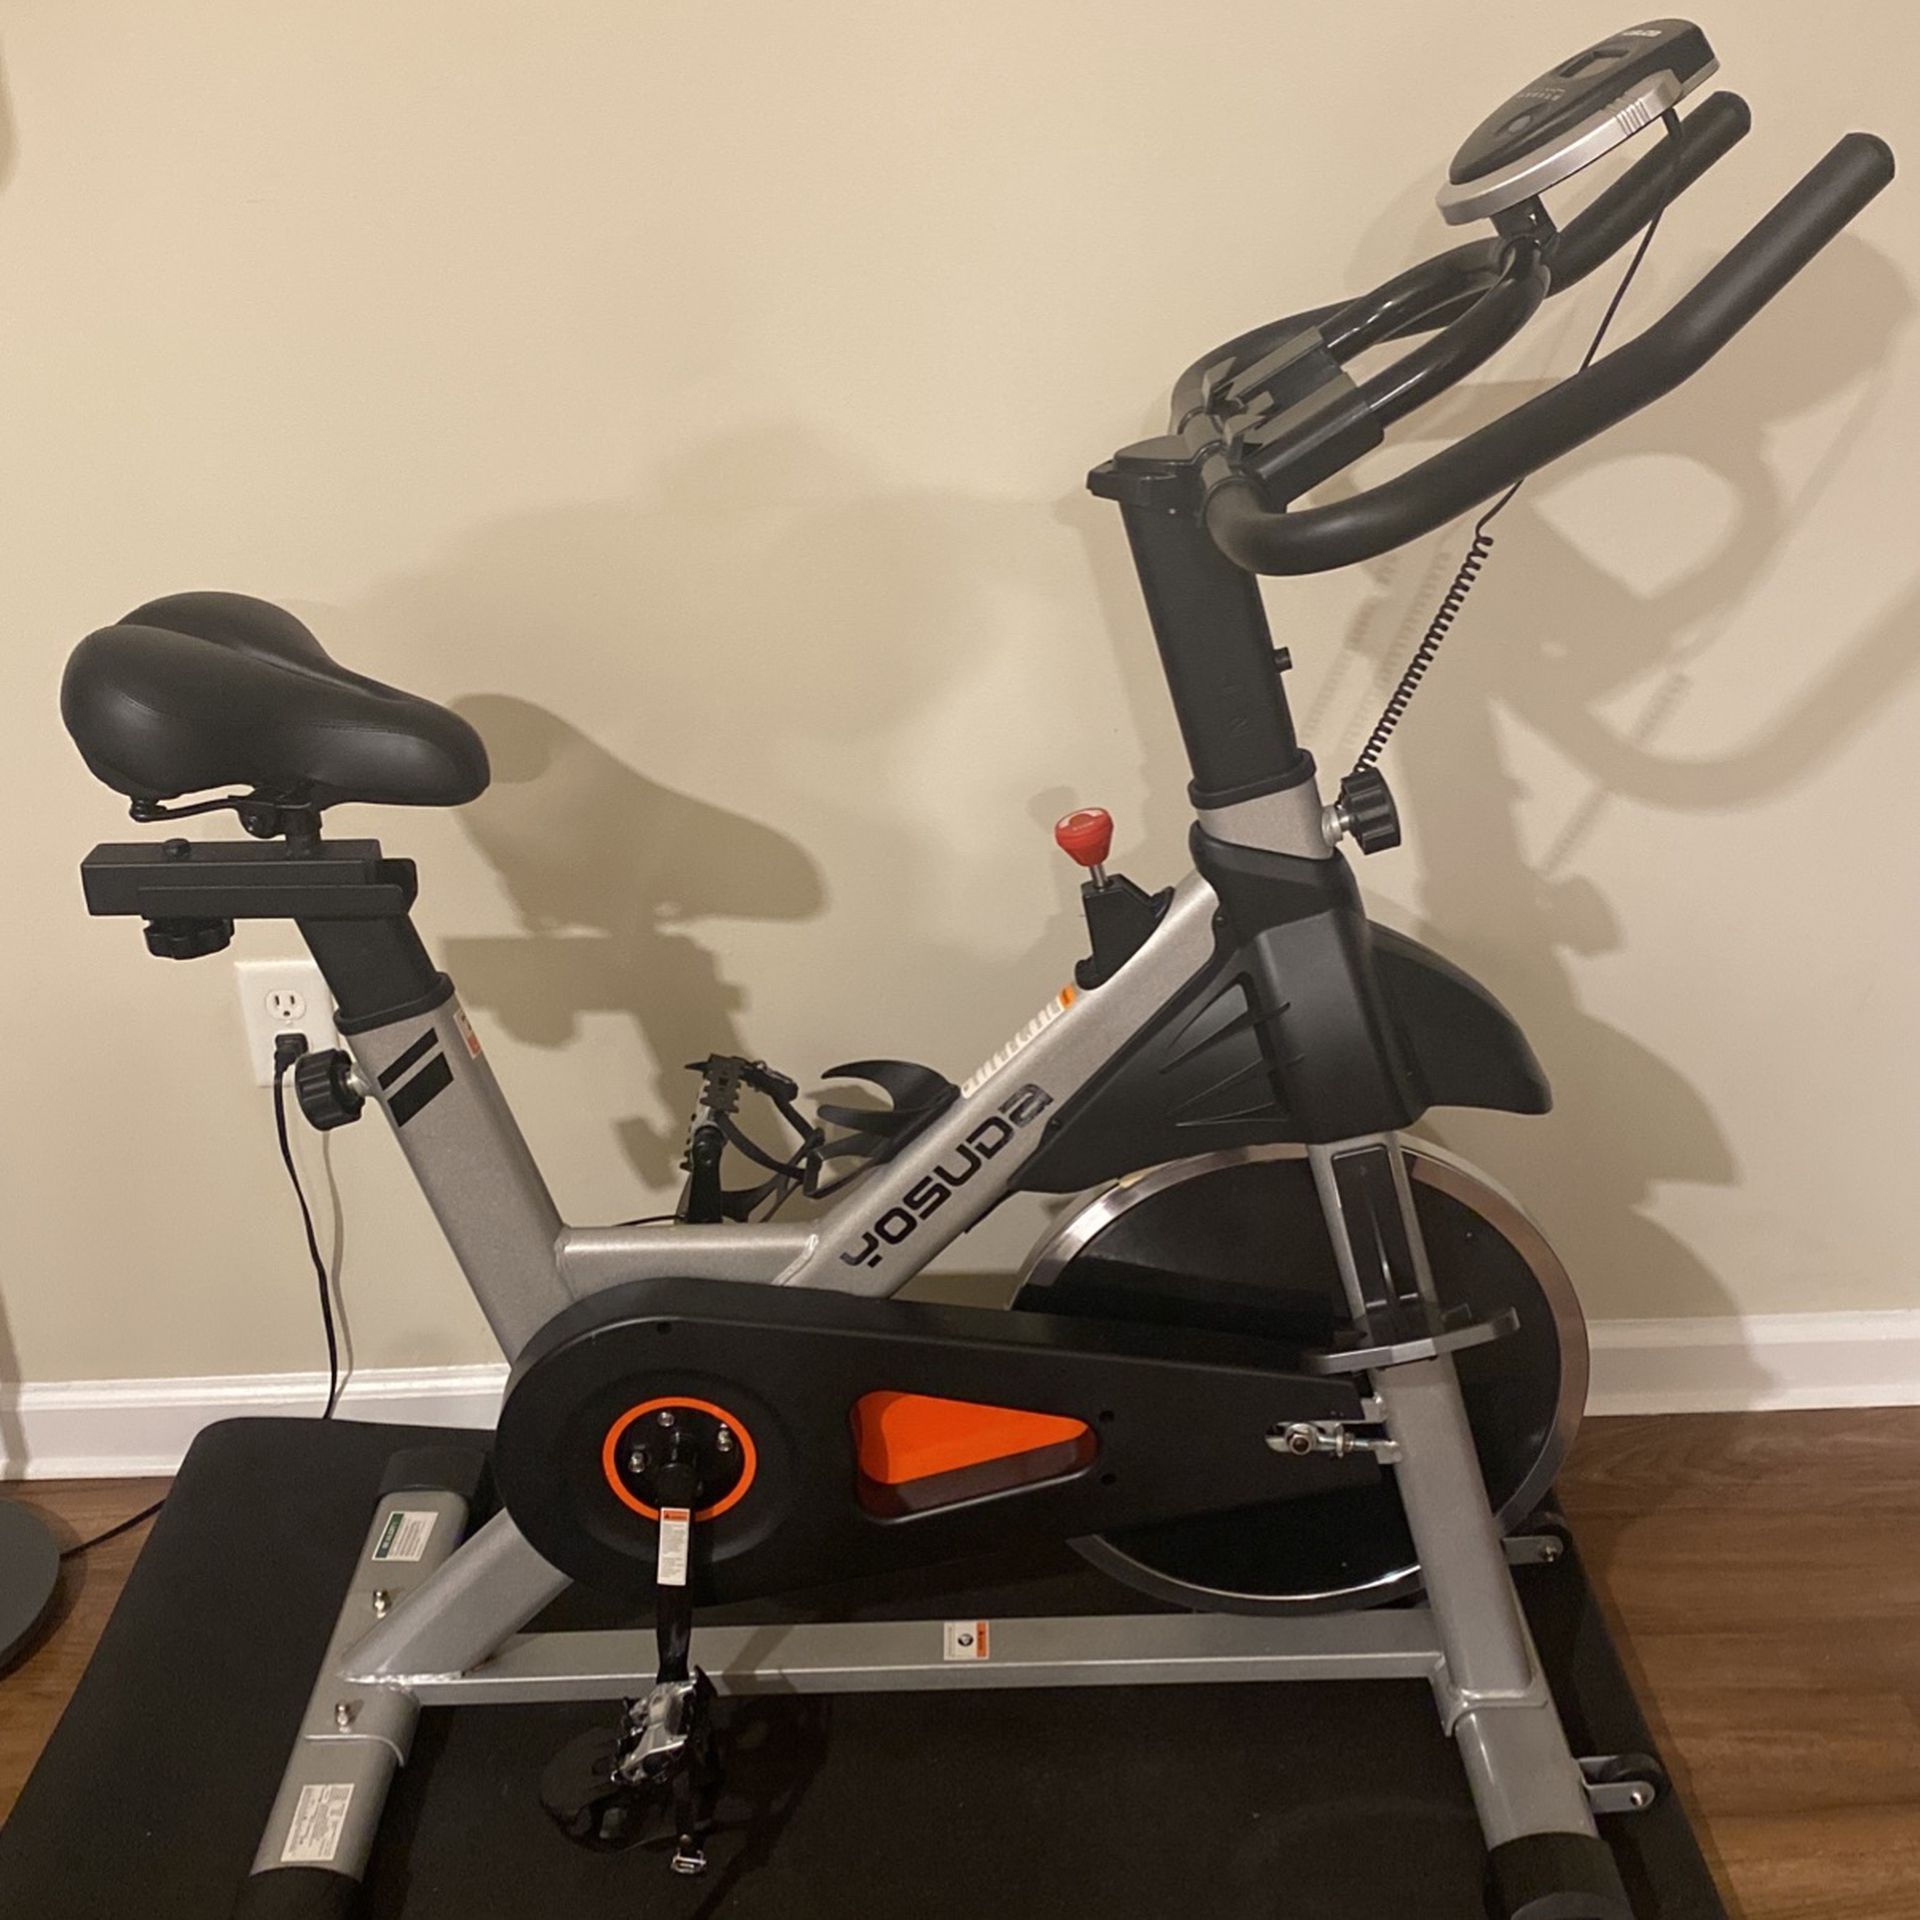 Home Spinning (cycling) Bike Set (As New-Less Than 6 Months/Used Less Than 10 Times)